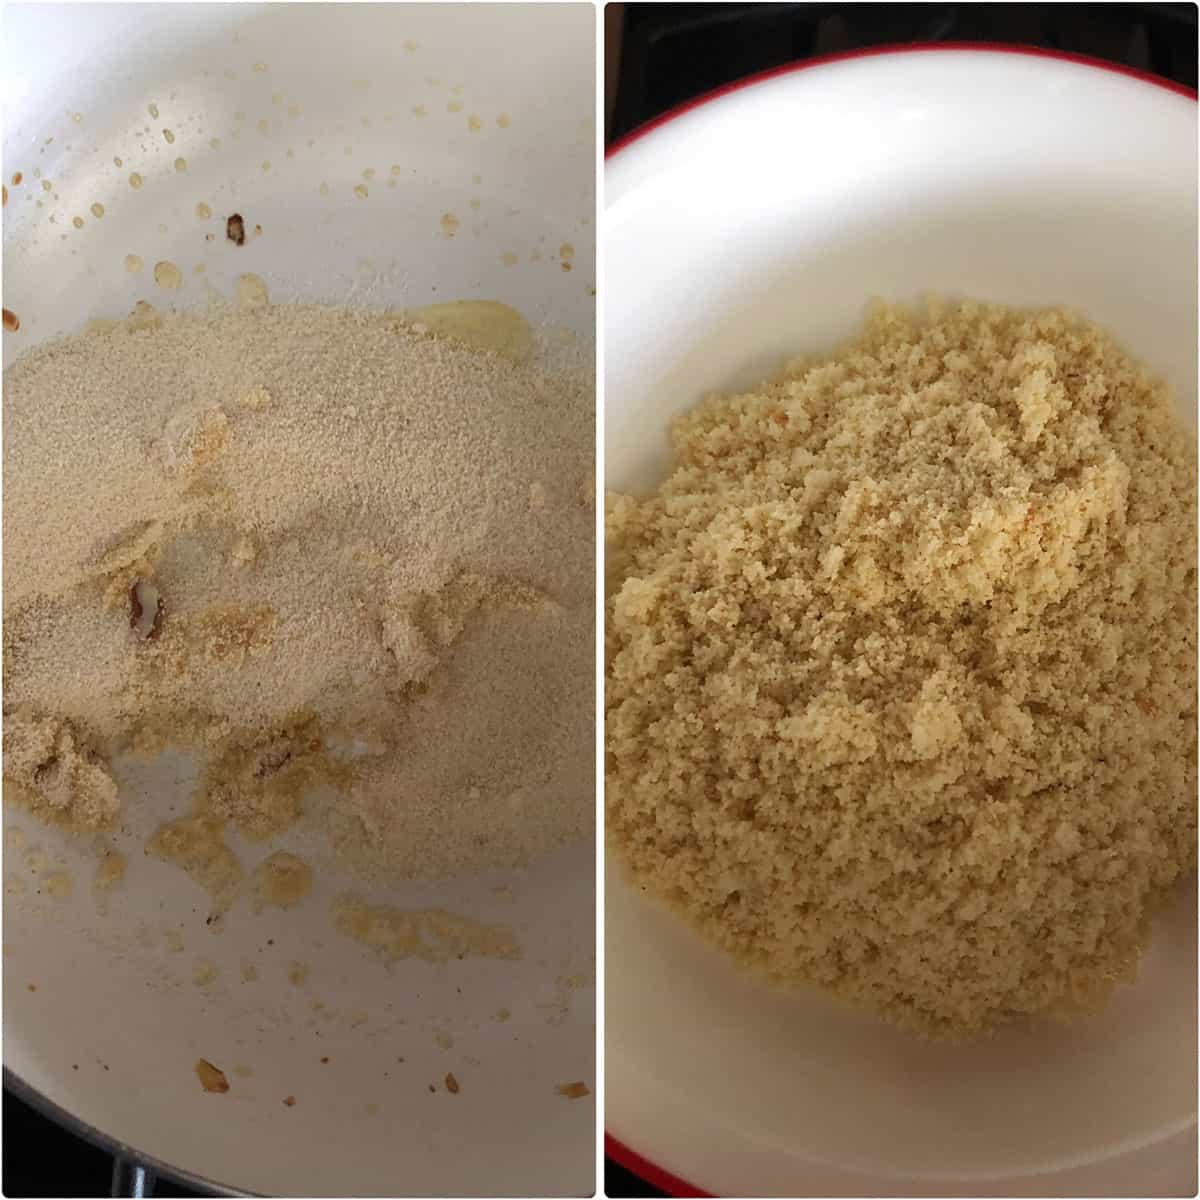 Cooking sooji in ghee until golden and removed into a bowl